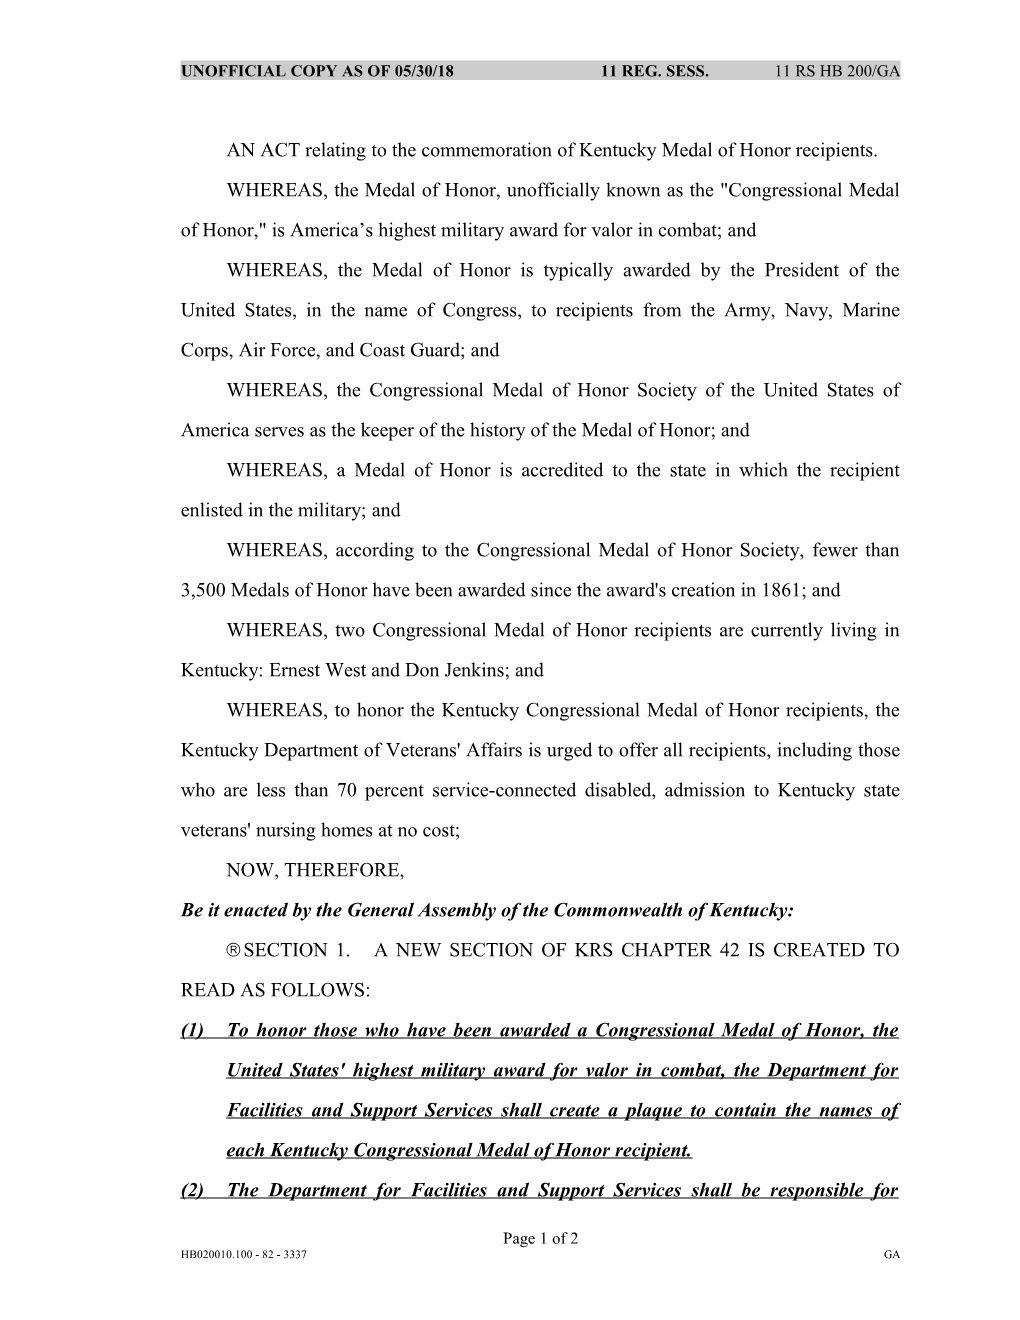 AN ACT Relating to the Commemoration of Kentucky Medal of Honor Recipients